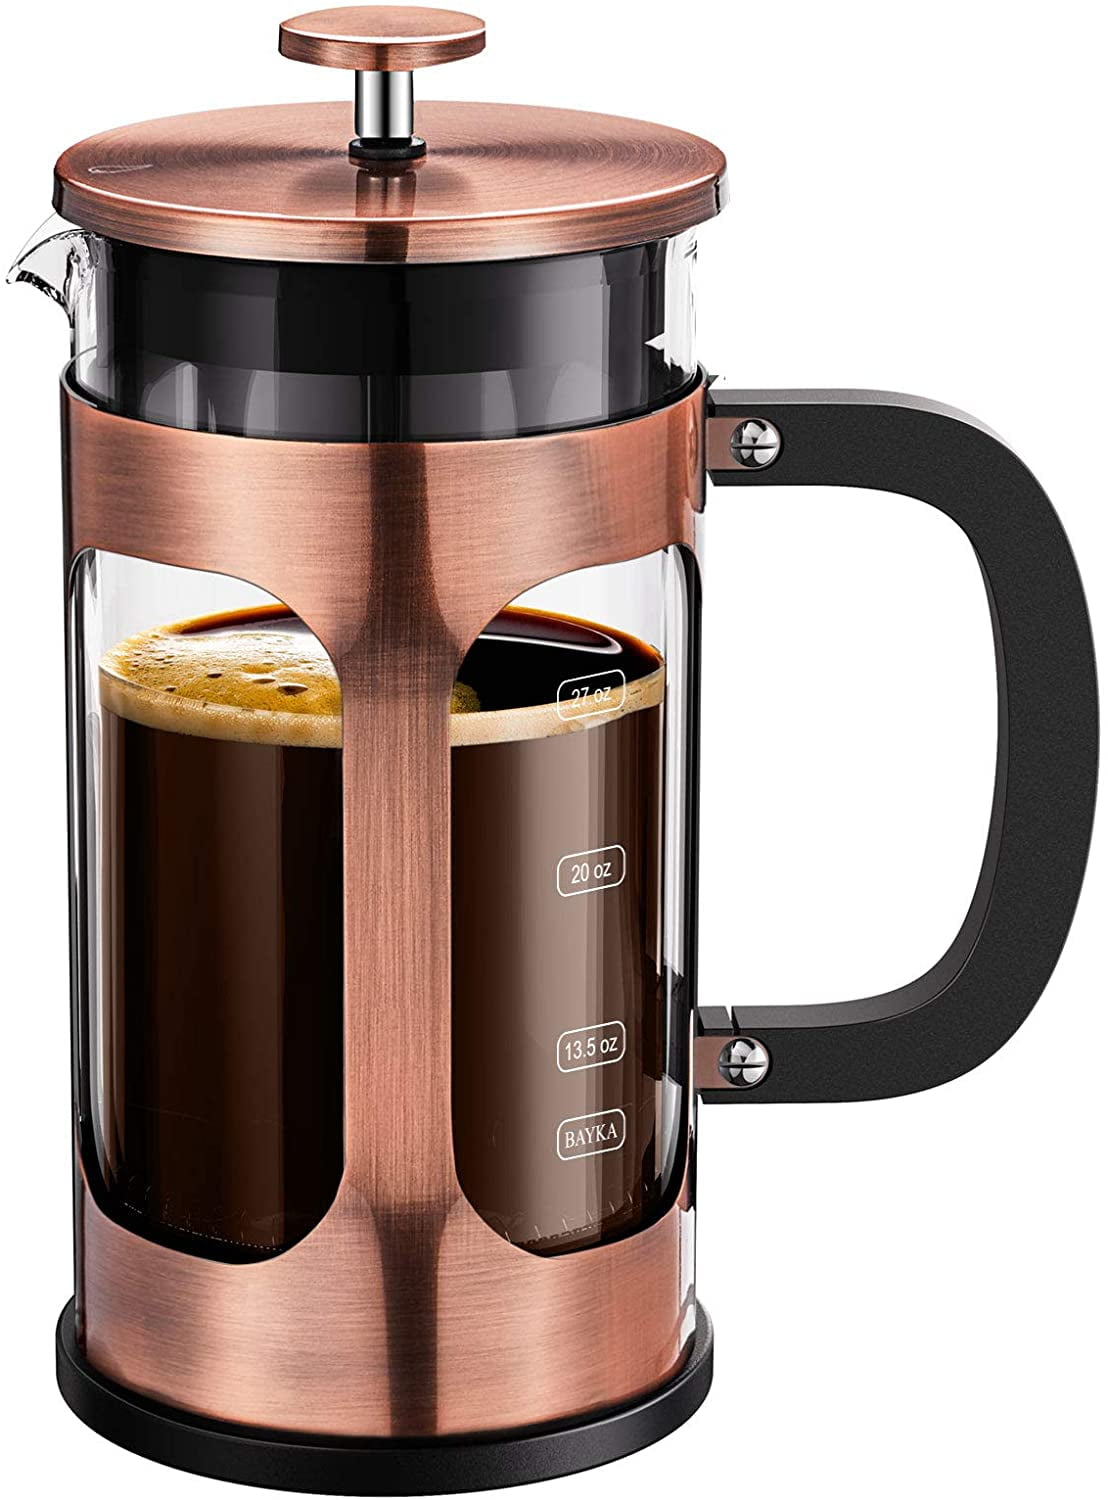 Mini French Press for 12oz Small French Press Coffee Maker with 4 Level Filtration System Borosilicate Glass Durable Stainless Steel Thickened Heat ResistantBlack 